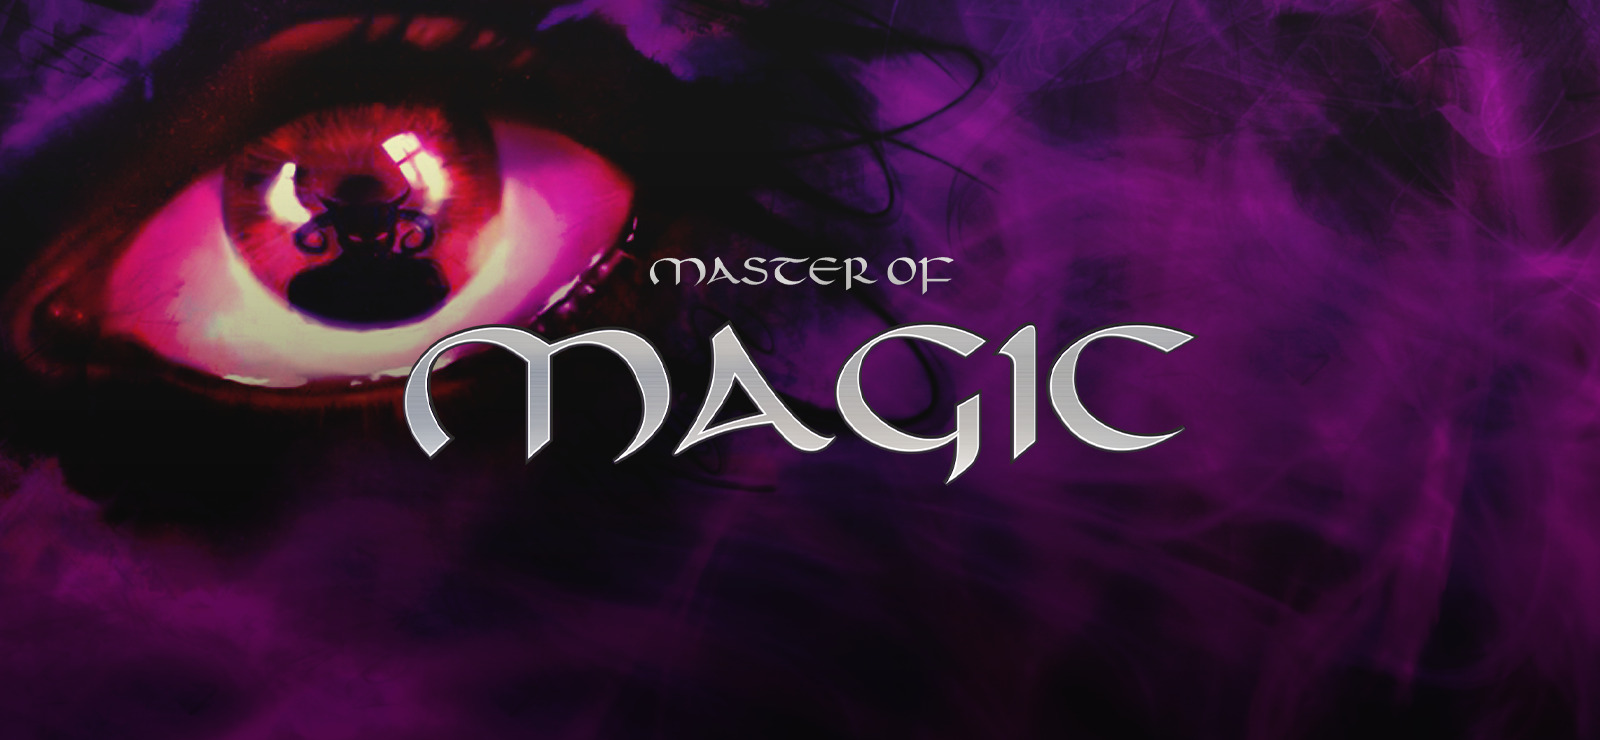 

Master of Magic Classic is a classic, one of the most popular strategy games of the 90s